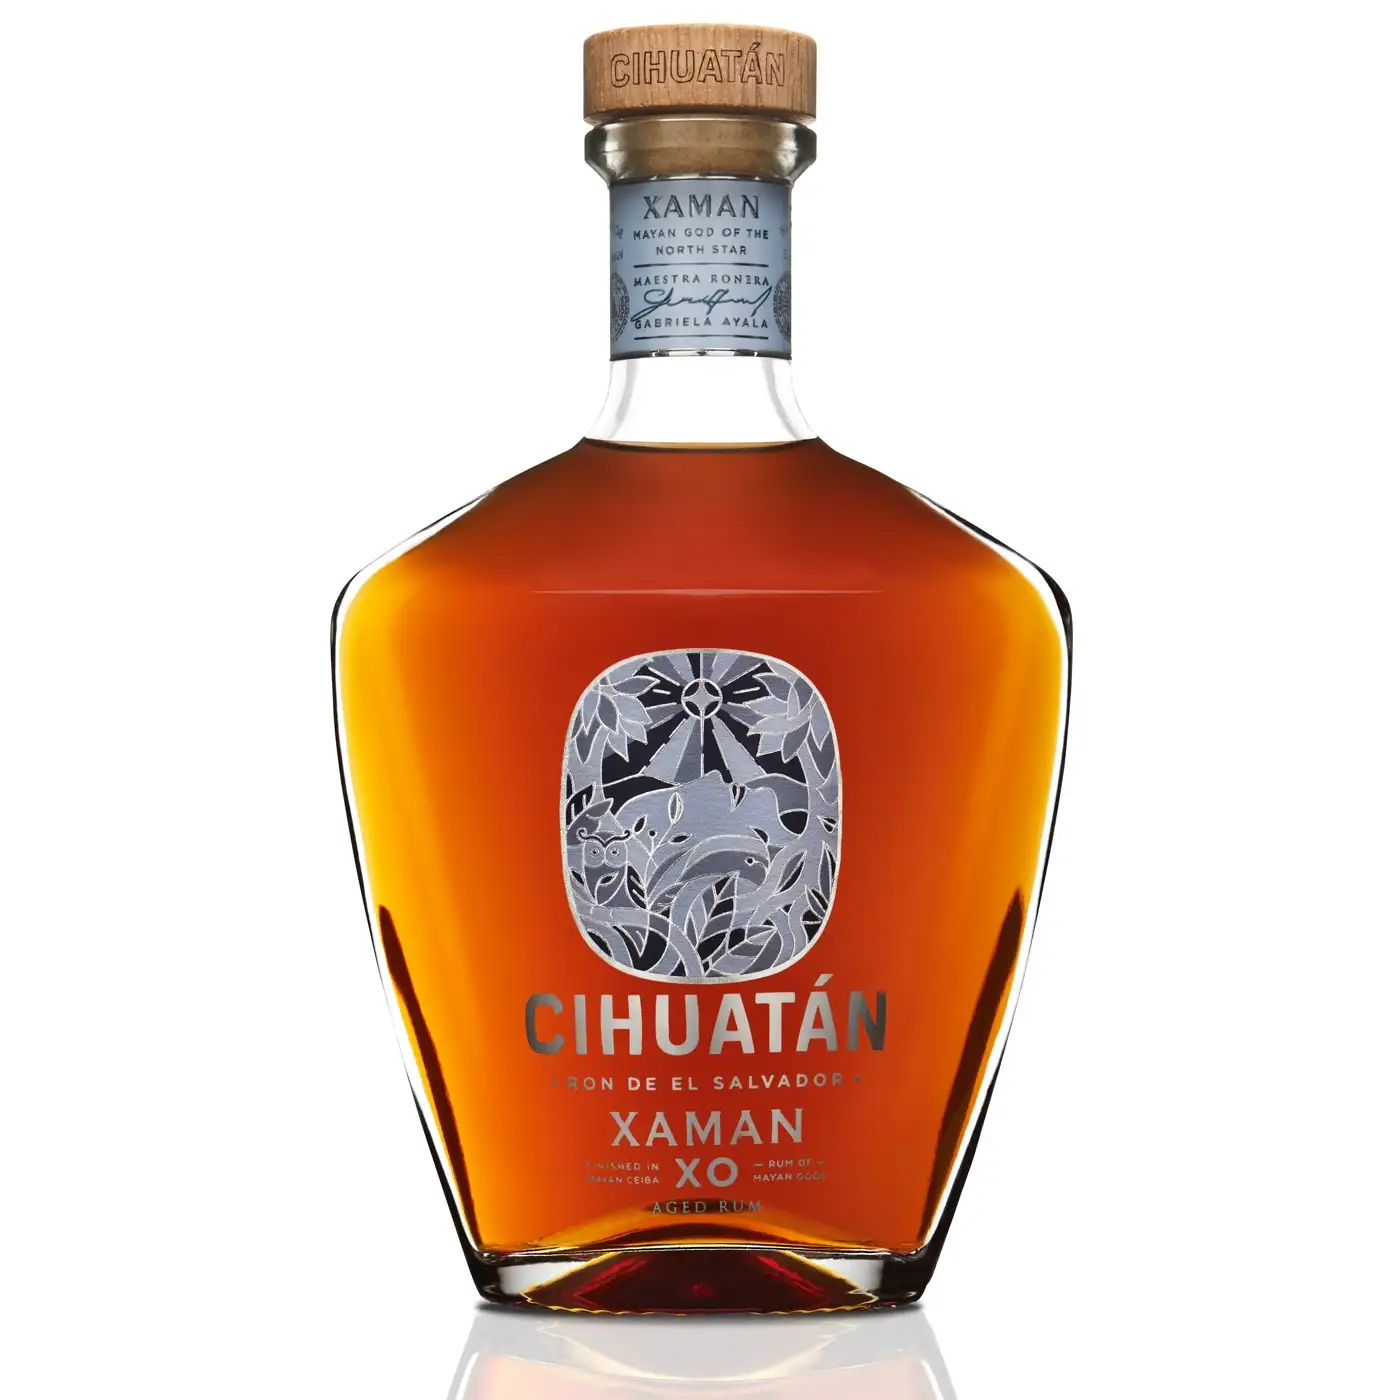 Image of the front of the bottle of the rum Cihuatán XAMAN XO